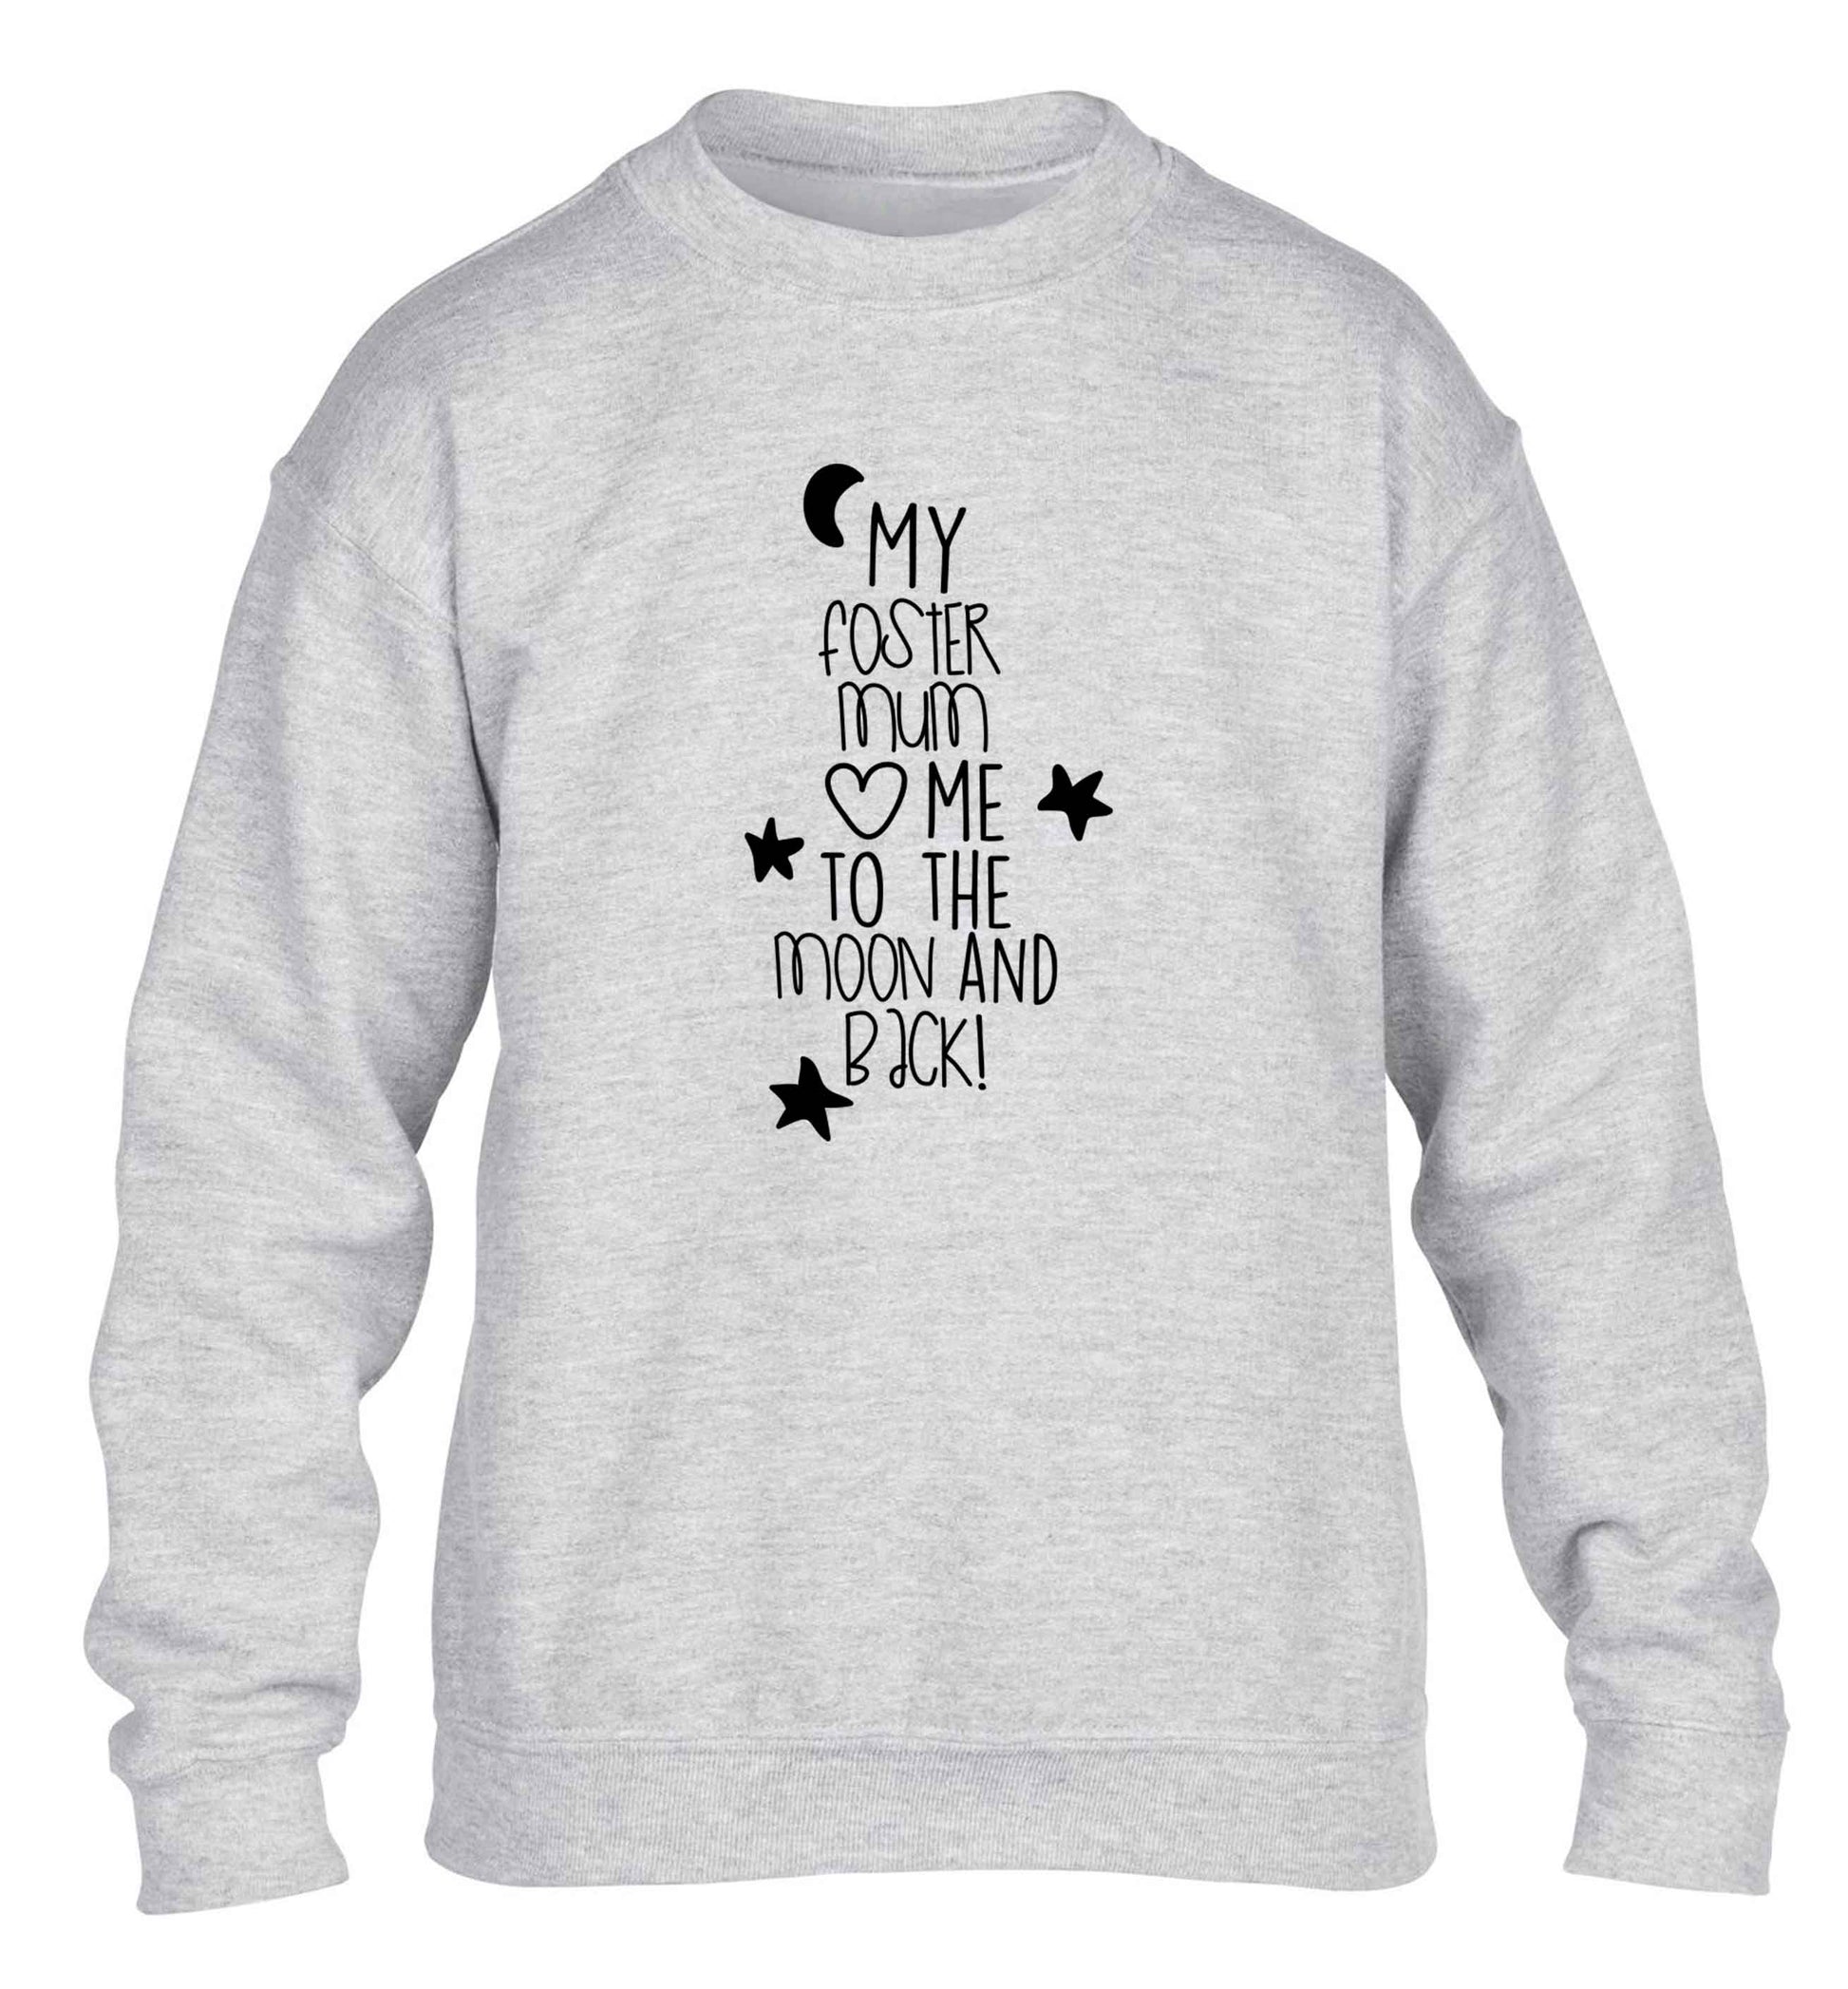 My foster mum loves me to the moon and back children's grey sweater 12-13 Years